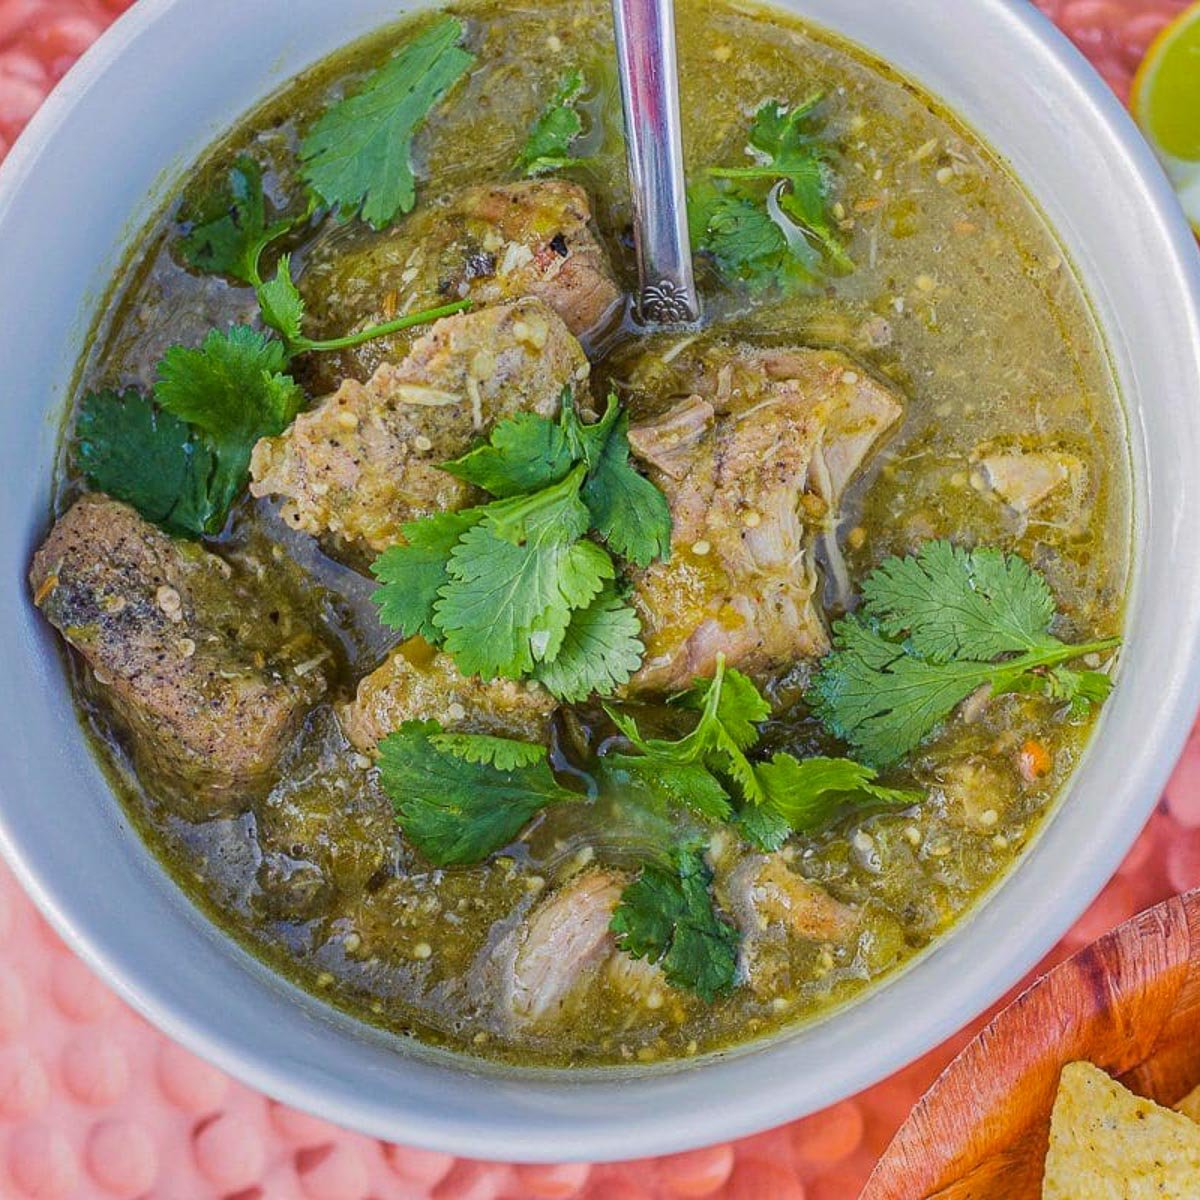 Chili Verde Recipe Mexican Pork Stew with Tomatillos and Peppers.